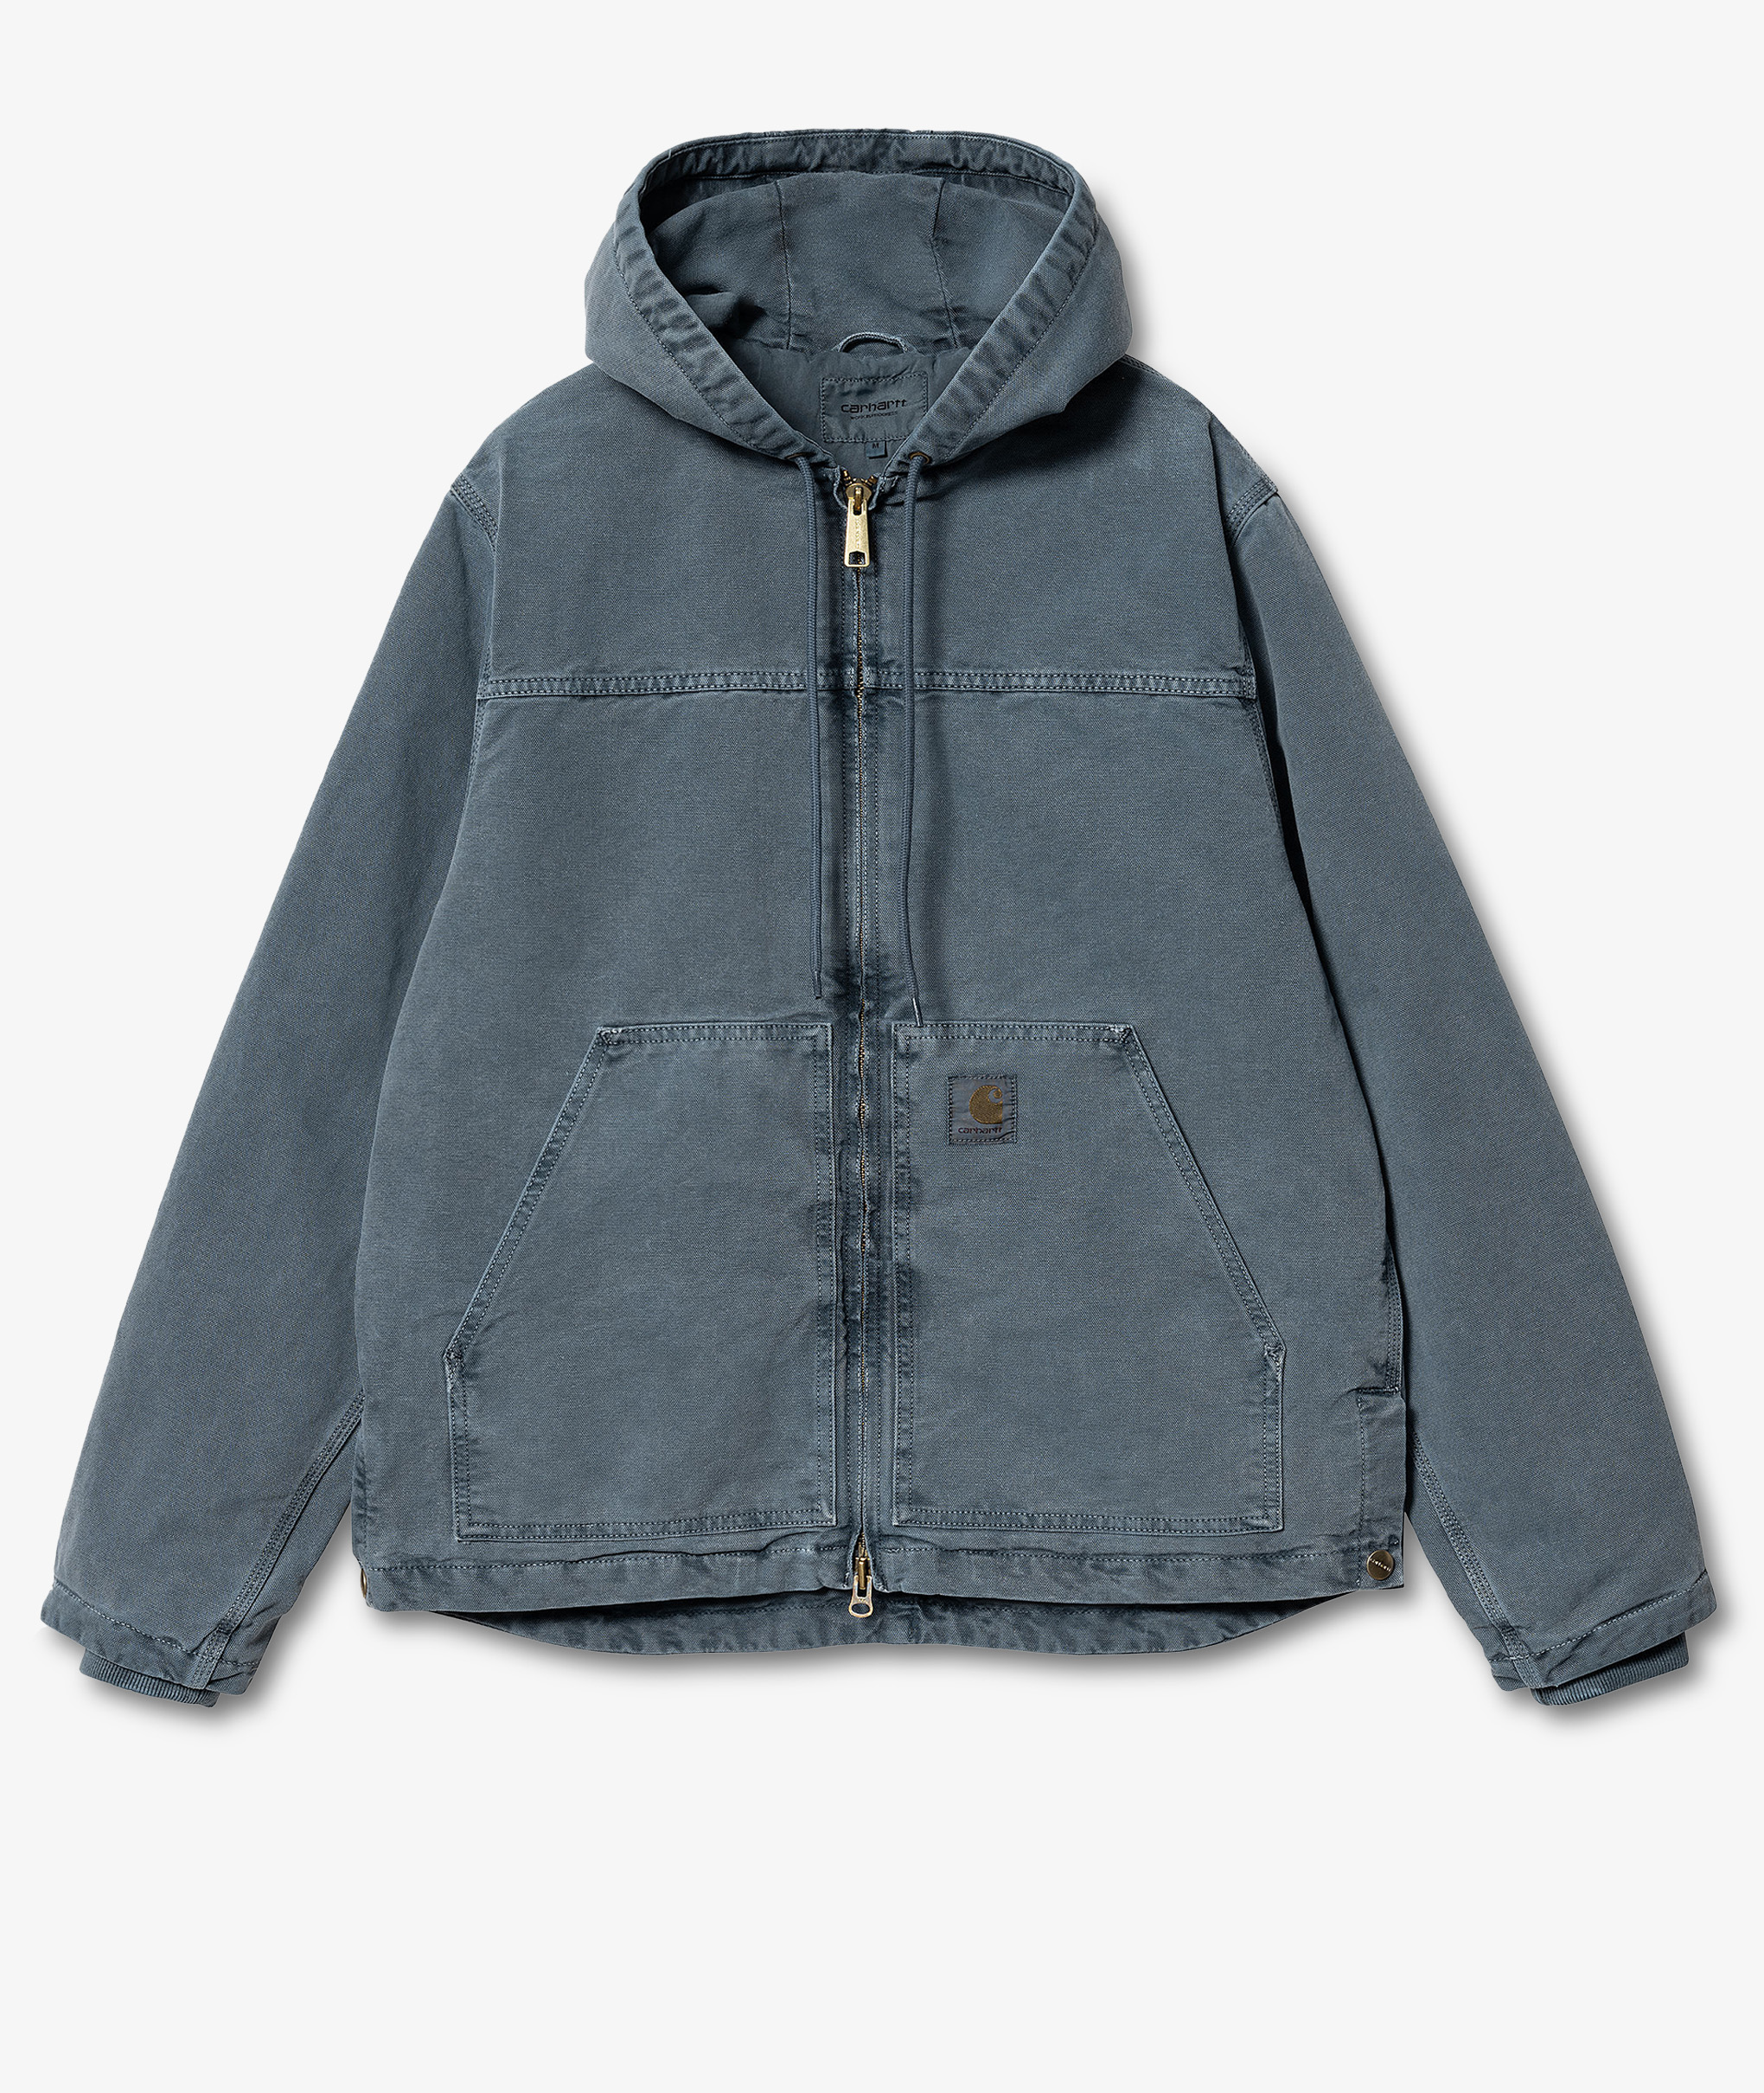 Norse Store | Shipping Worldwide - Carhartt WIP Arling Jacket - Storm Blue